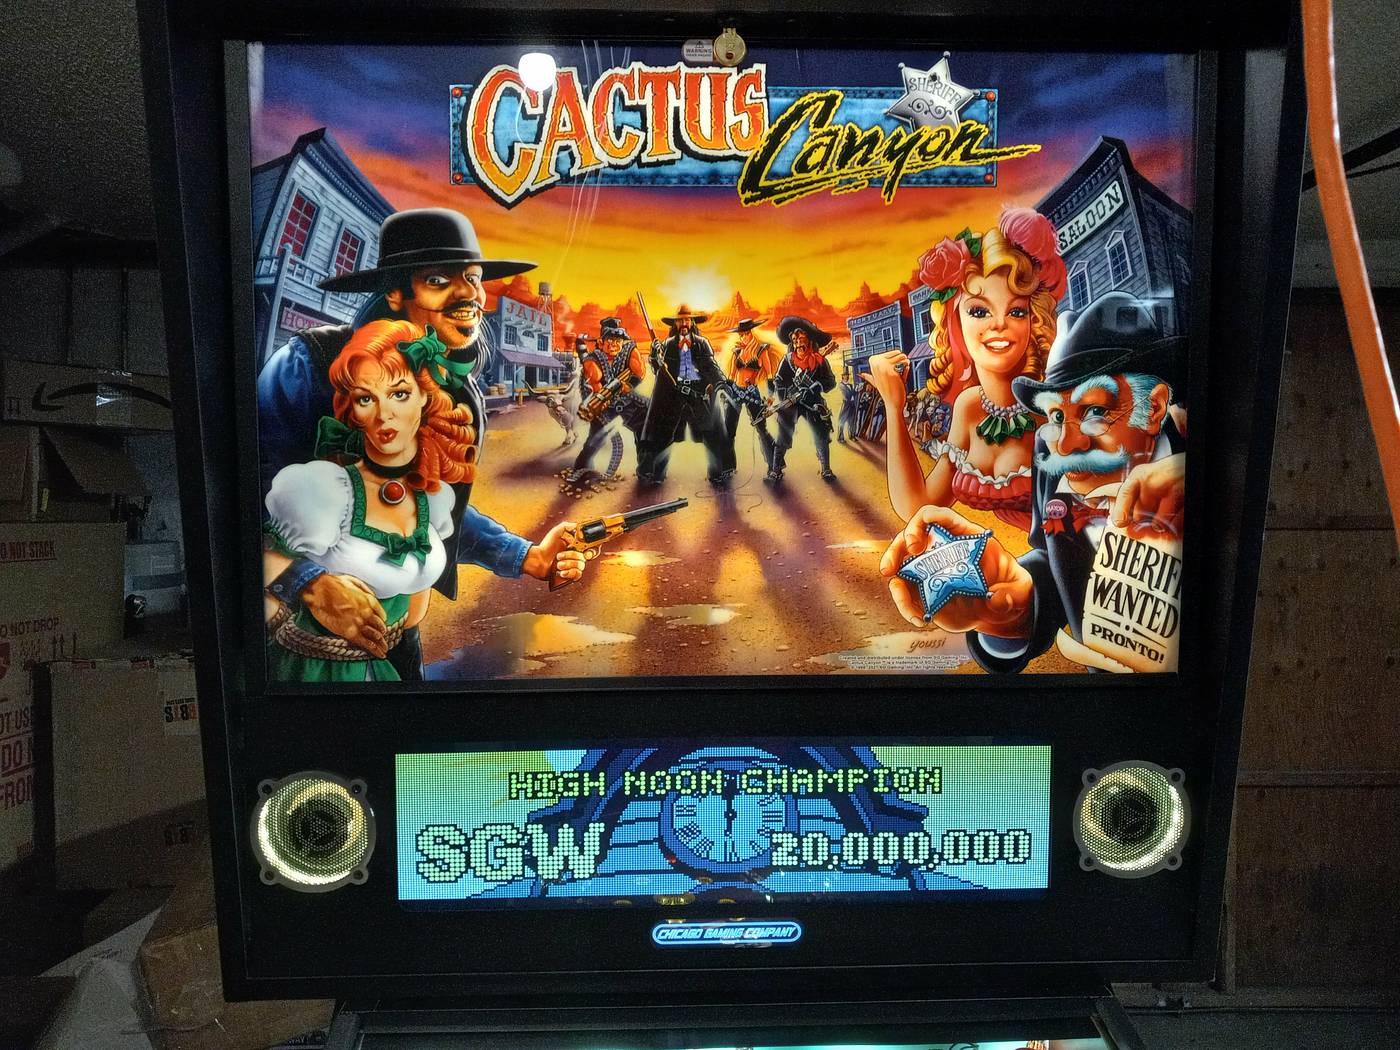 CHICAGO GAMING COMPANY'S CACTUS CANYON REMAKE NOW SHIPPING